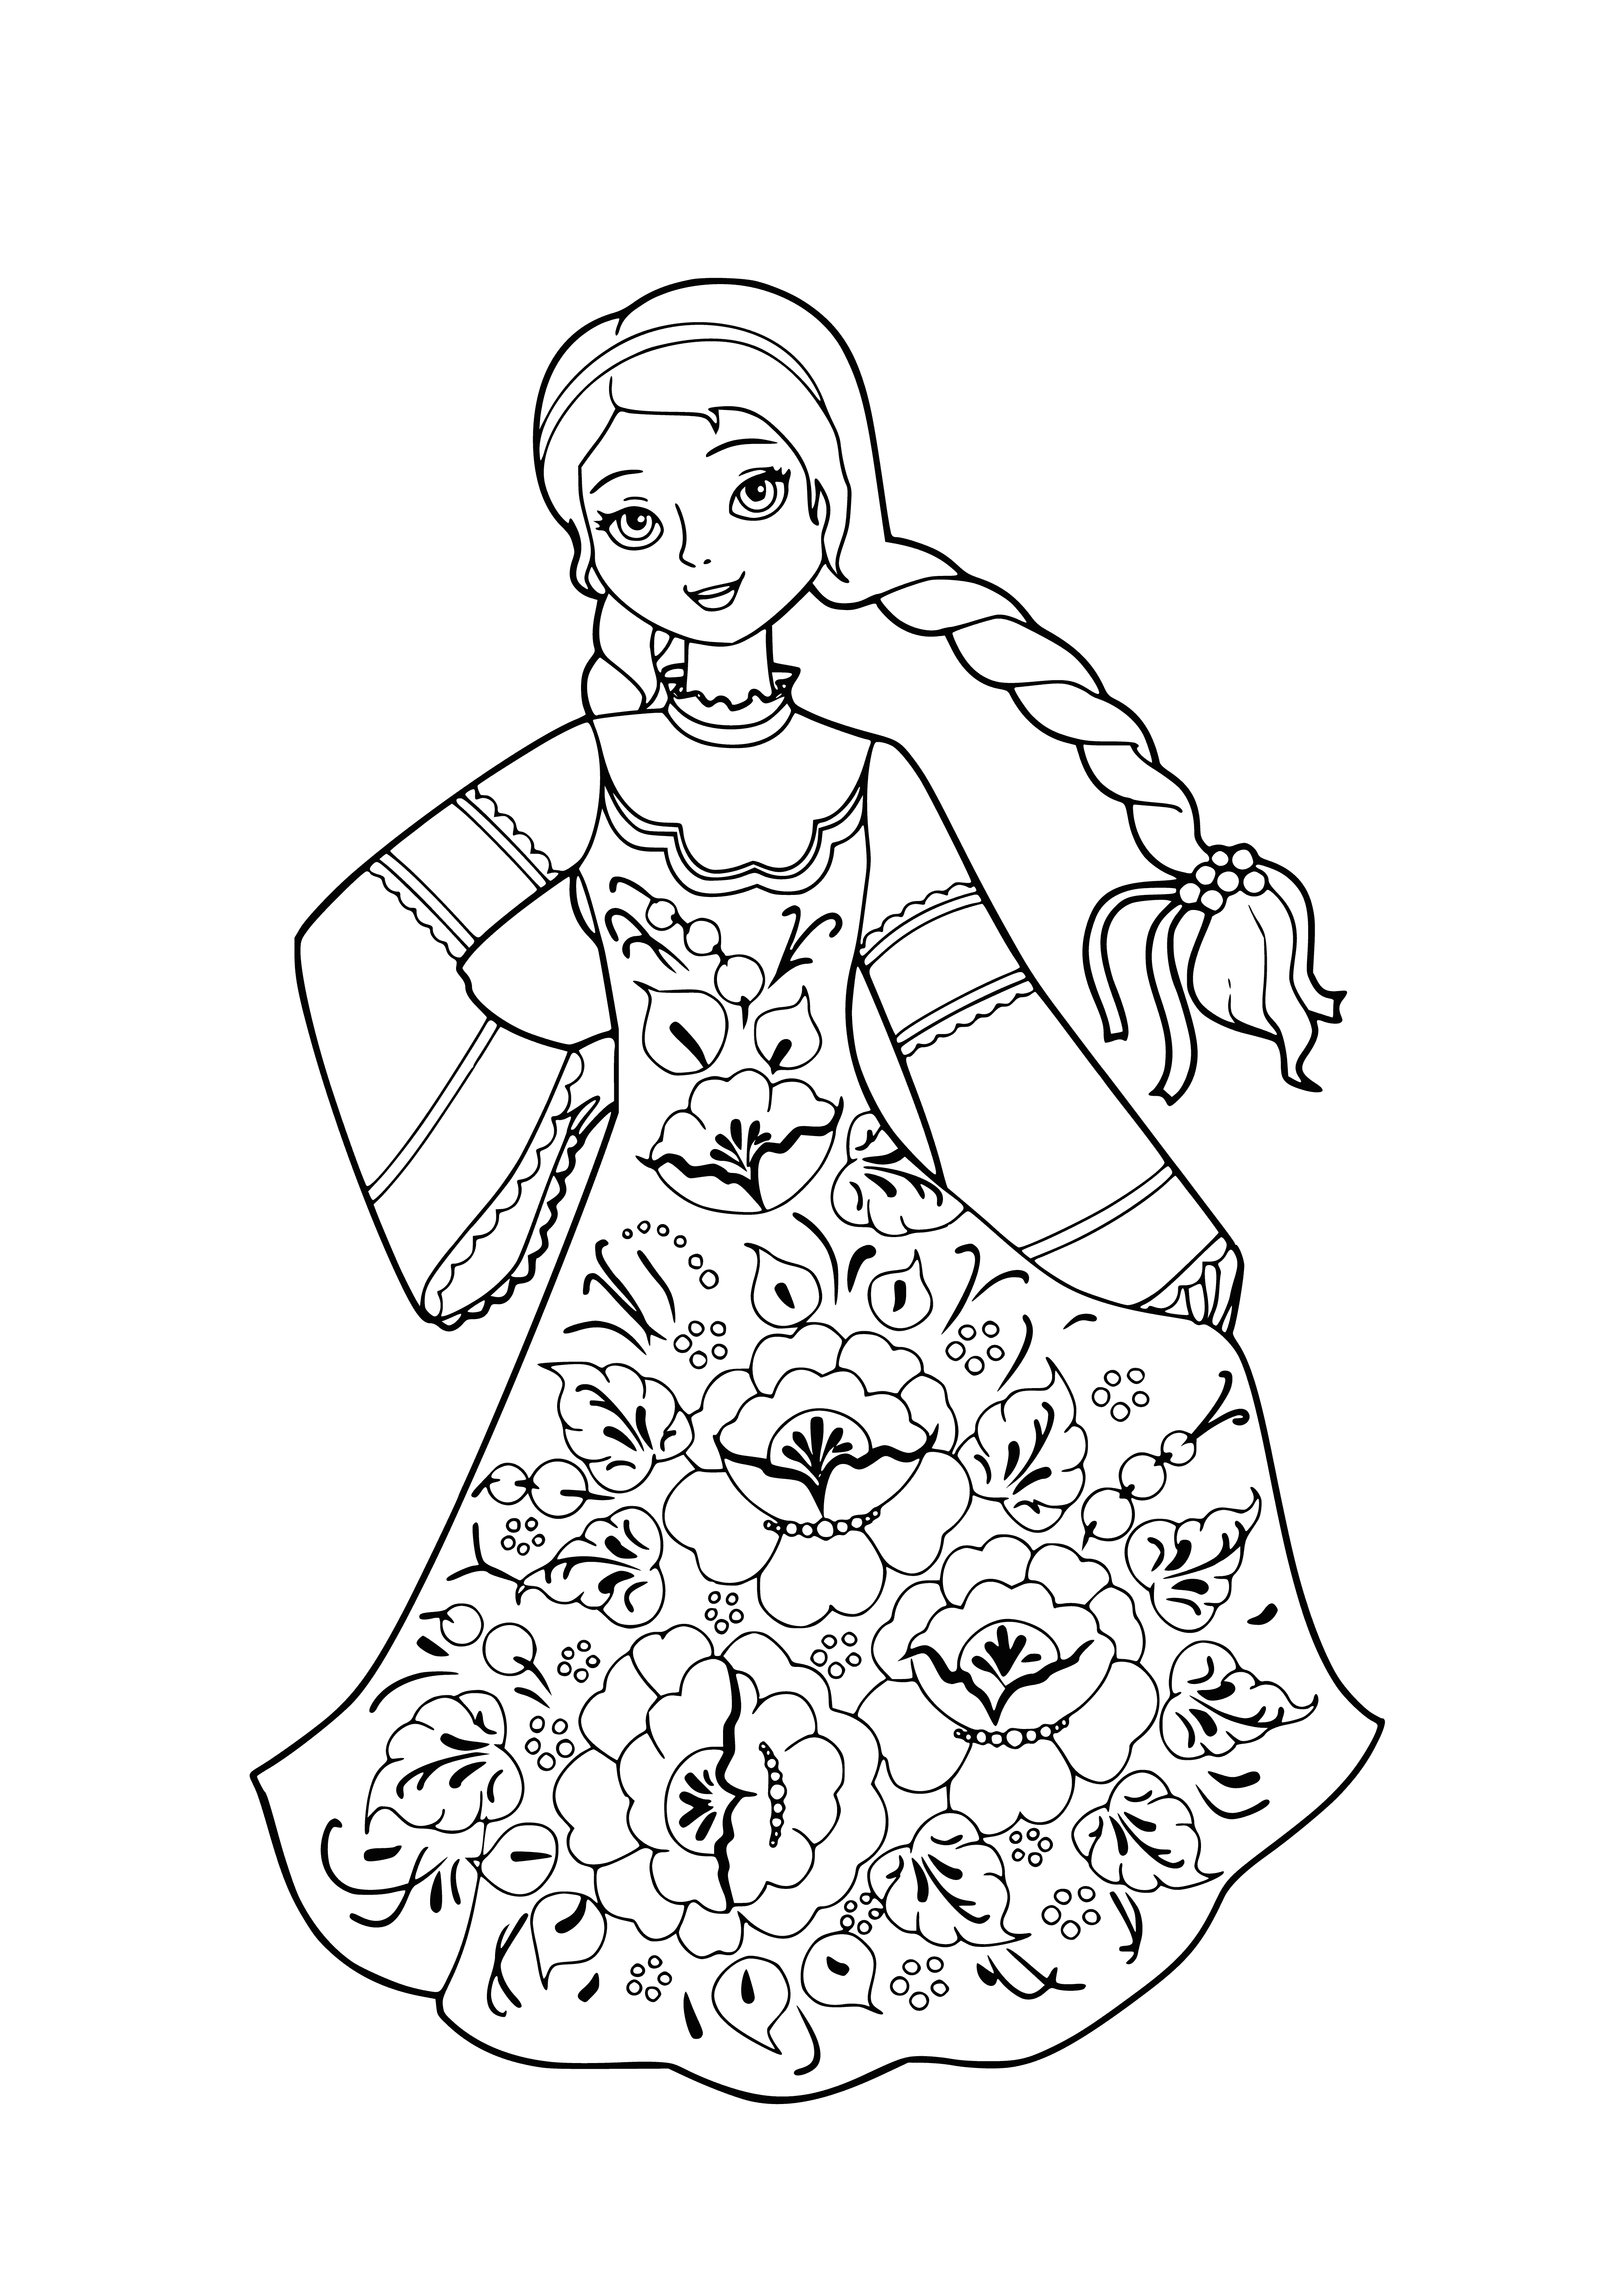 coloring page: Woman stands in white dress, blue shawl, looking out window, holding book in hands.